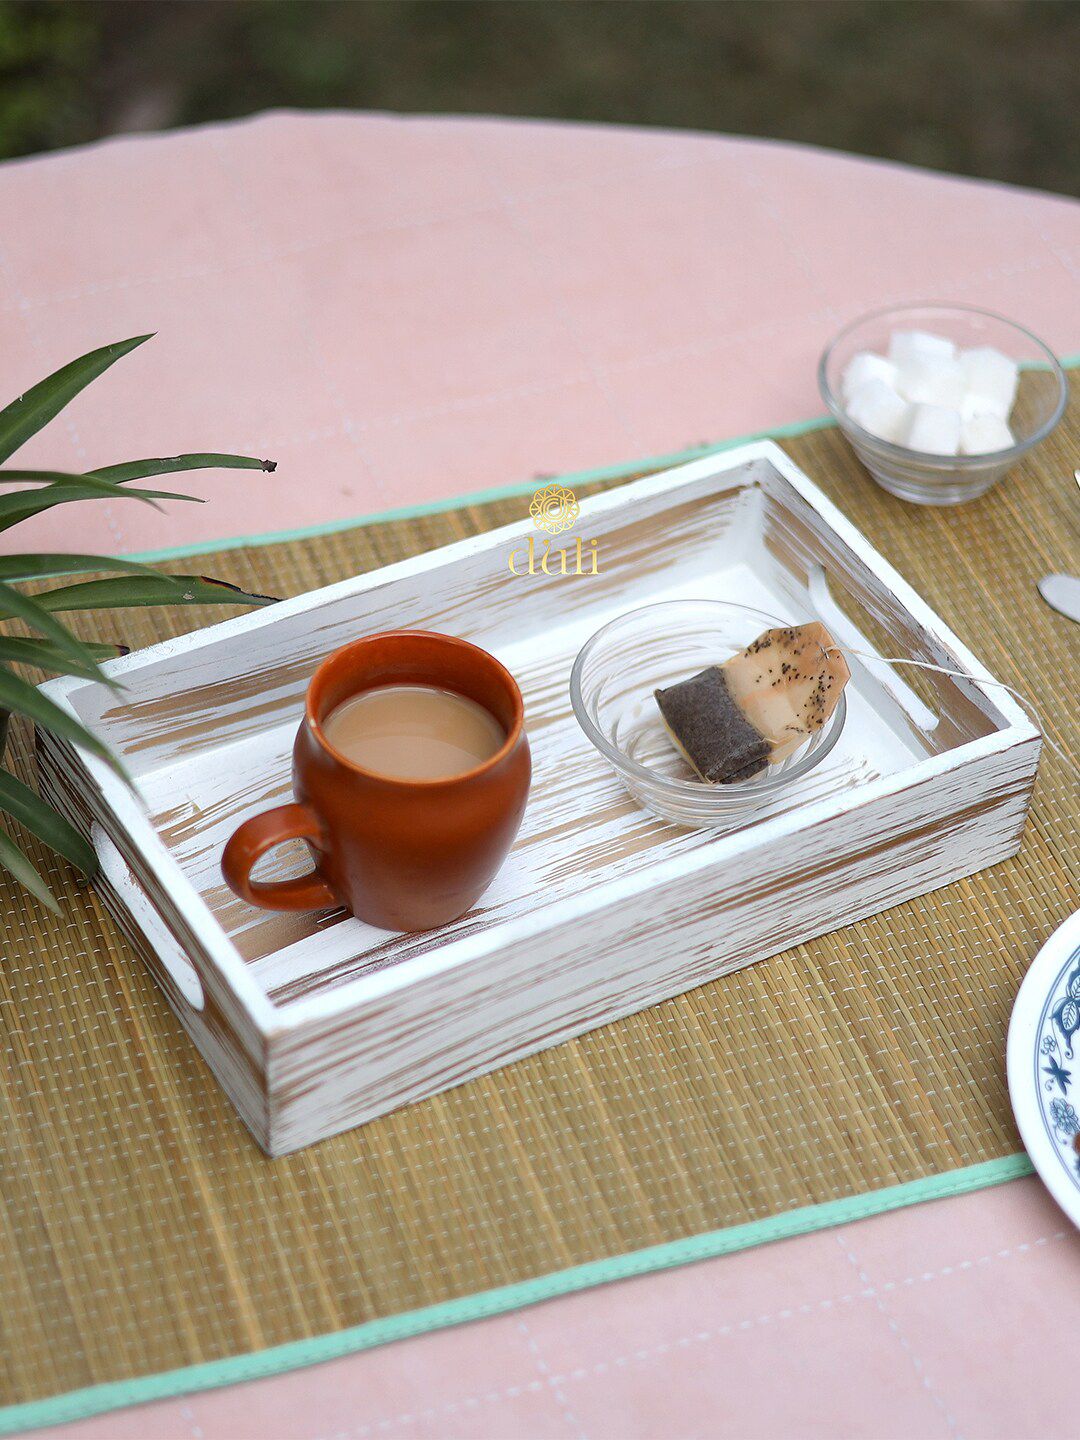 DULI White Printed Serving Tray Price in India